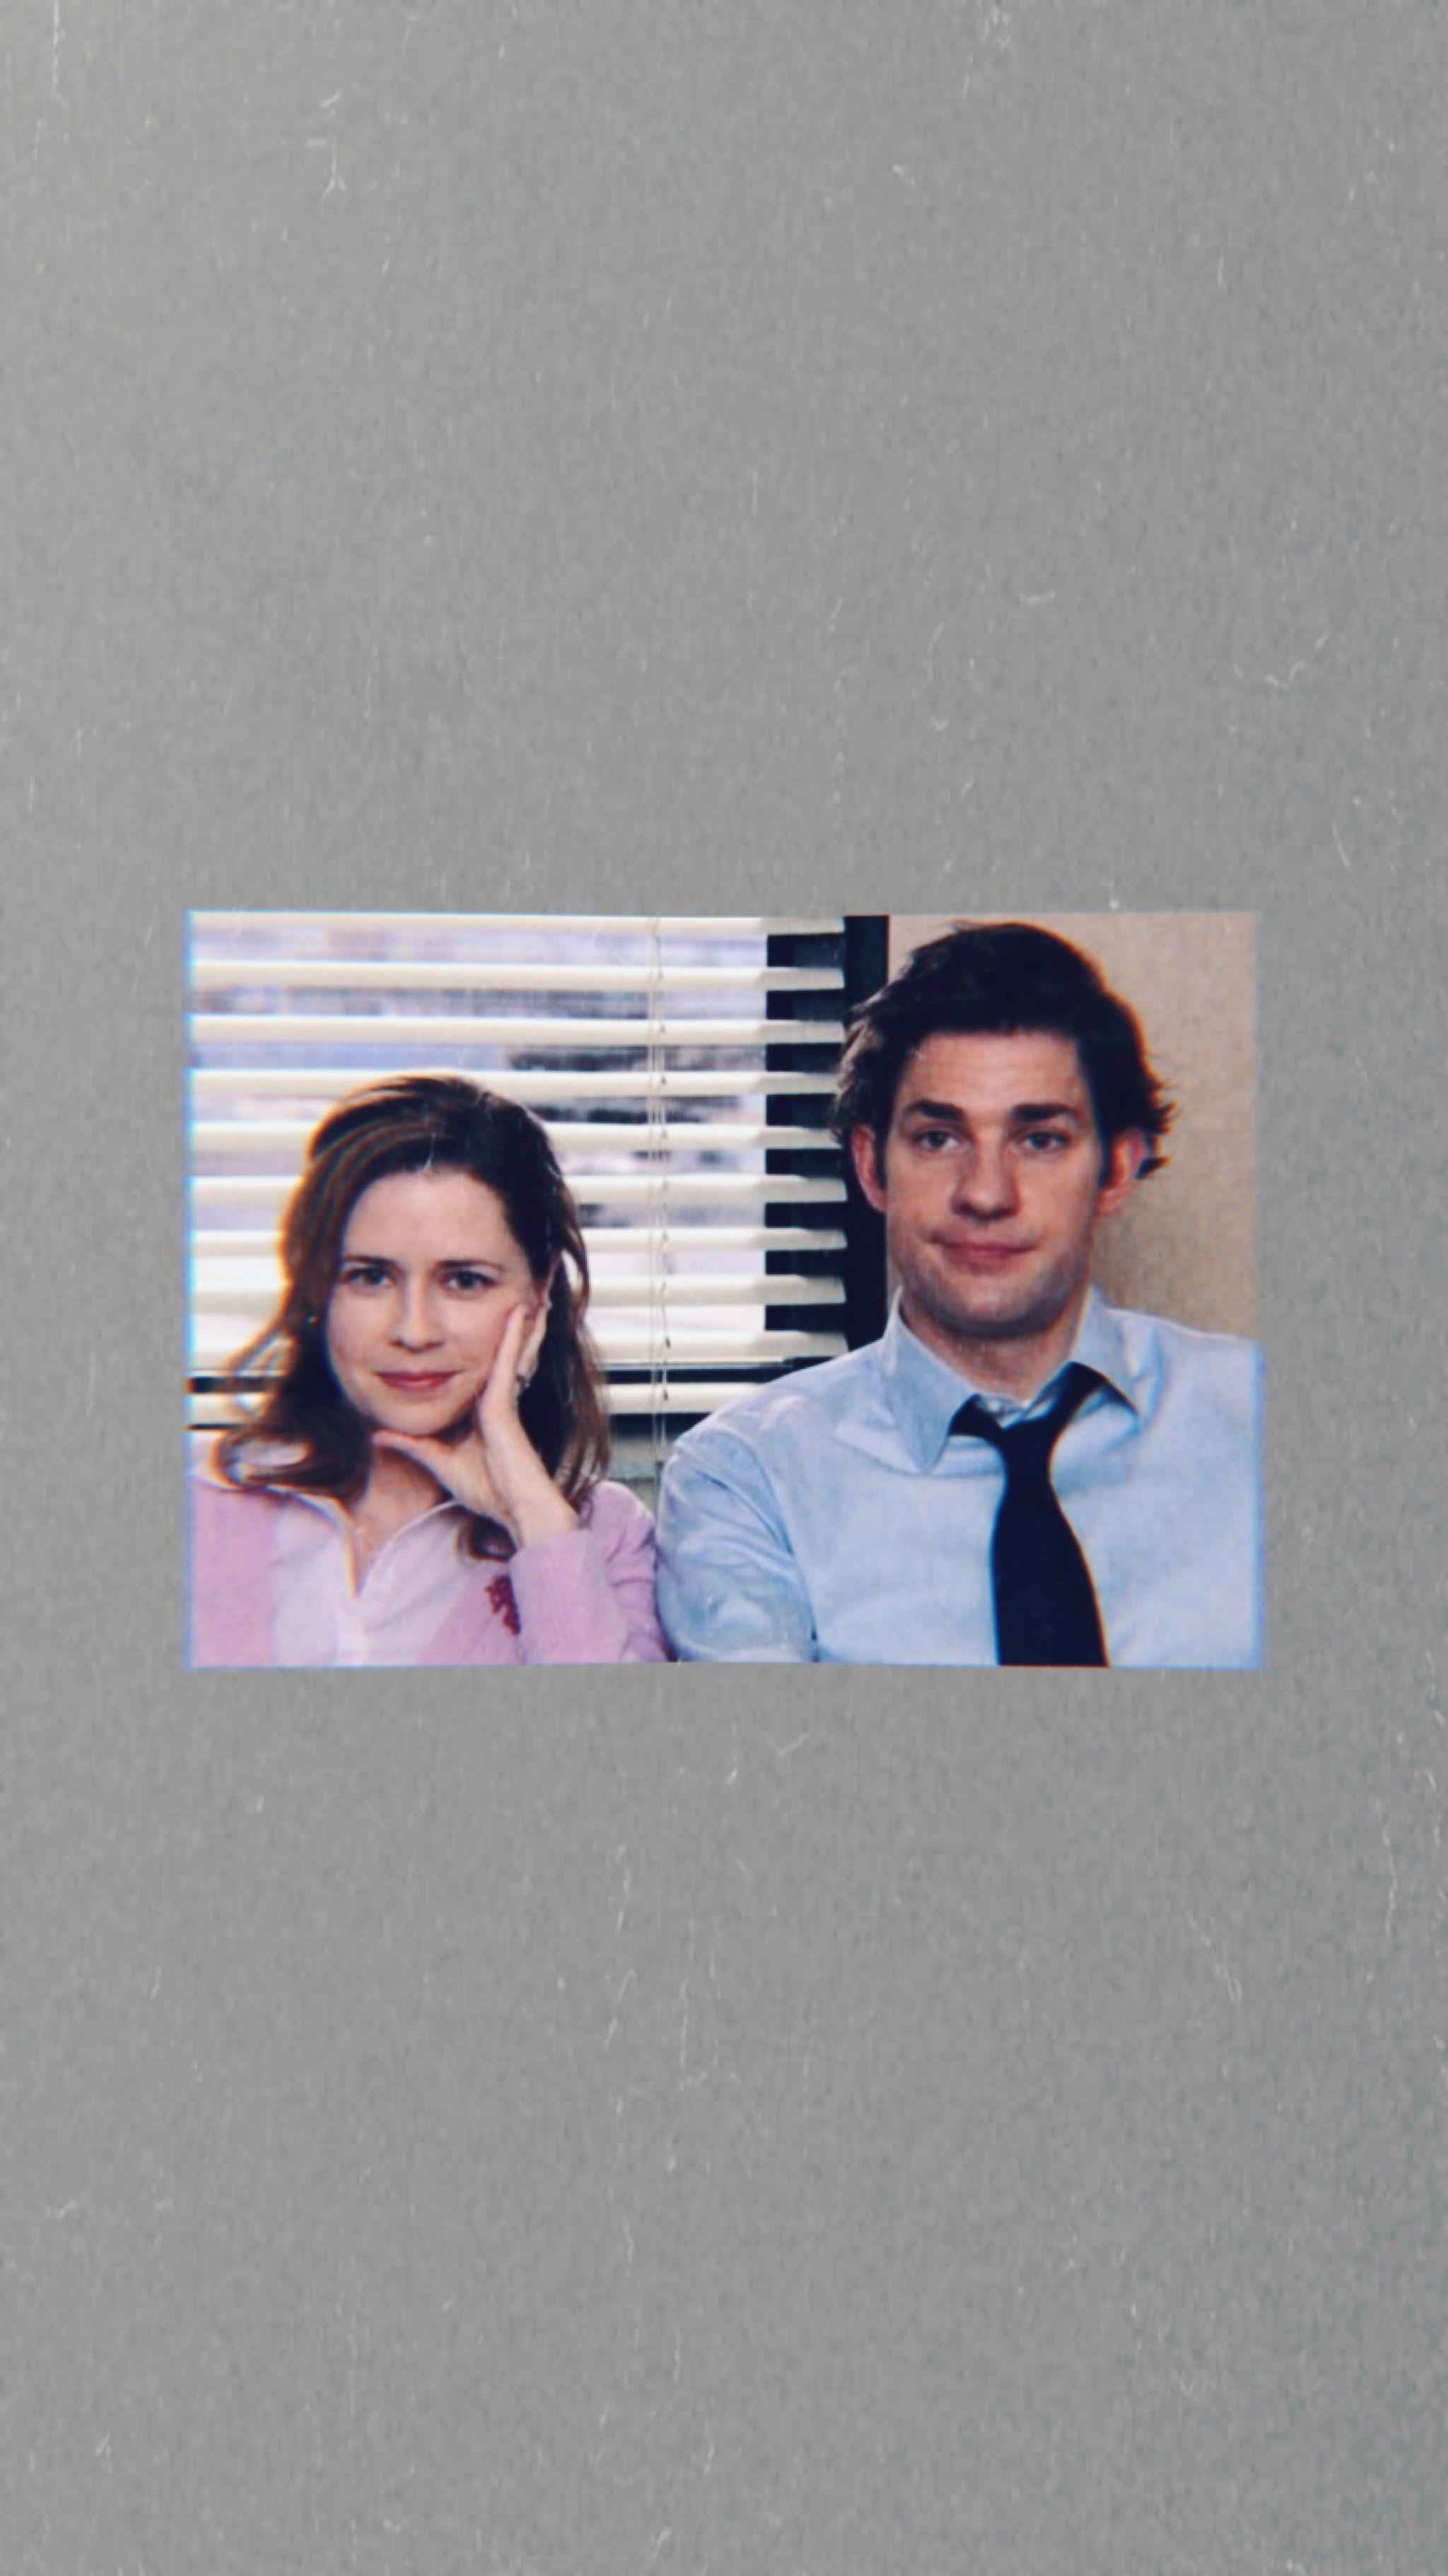 The Office Show Aesthetic